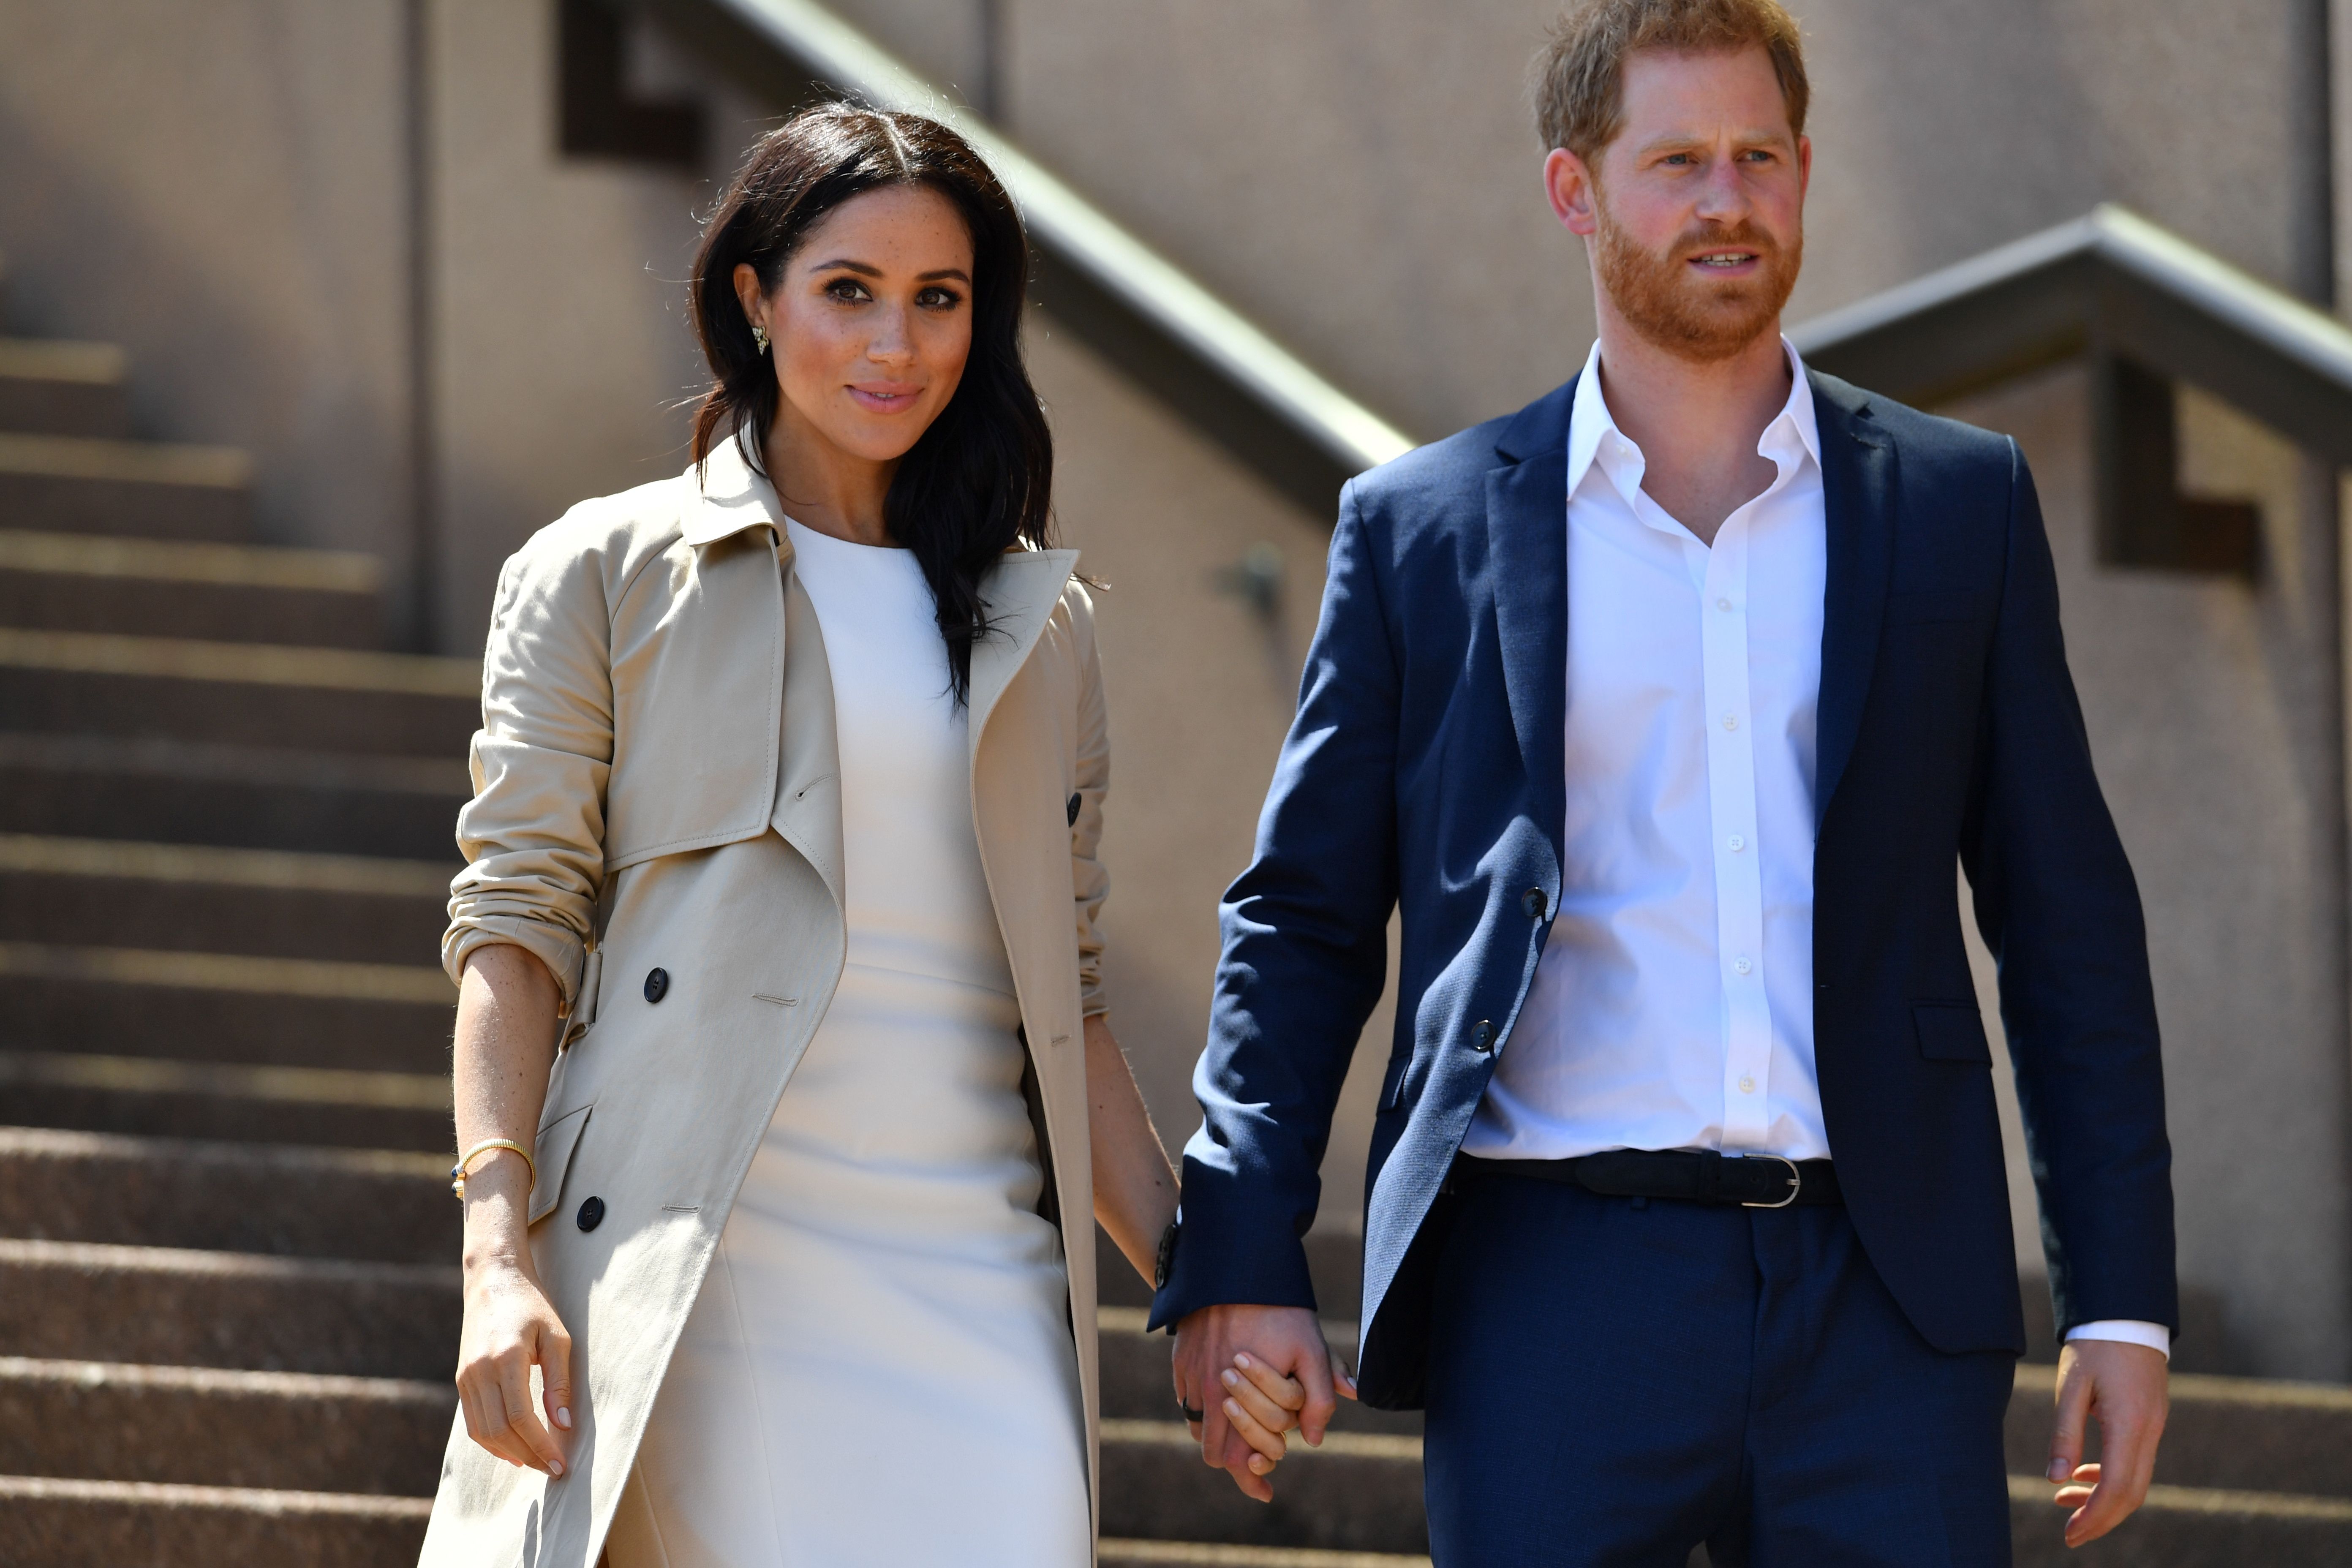 Body Language Expert Reveals ‘Conflict’ That Makes Meghan Markle Different from Princess Diana